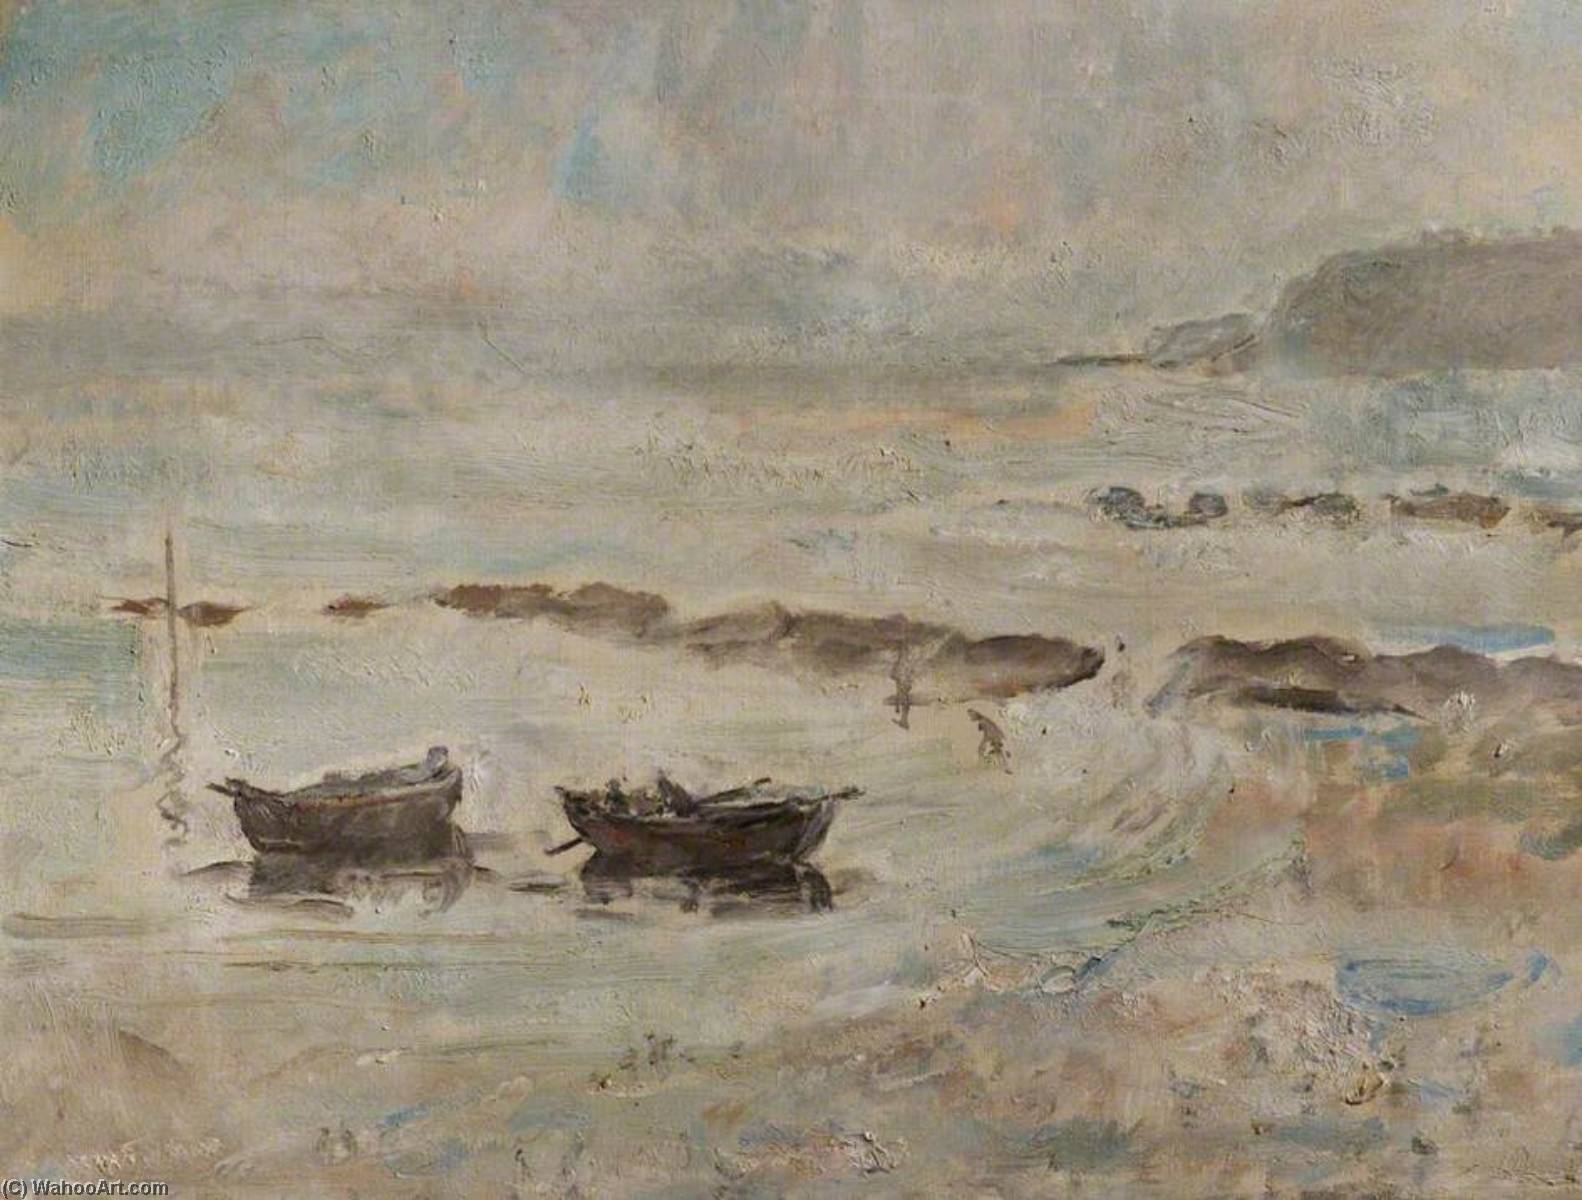 Buy Museum Art Reproductions Beached Dinghies on a Storm Tossed Shore, (Robin Hood`s Bay, North Yorkshire), 1938 by Ethel Walker (1861-1951) | ArtsDot.com